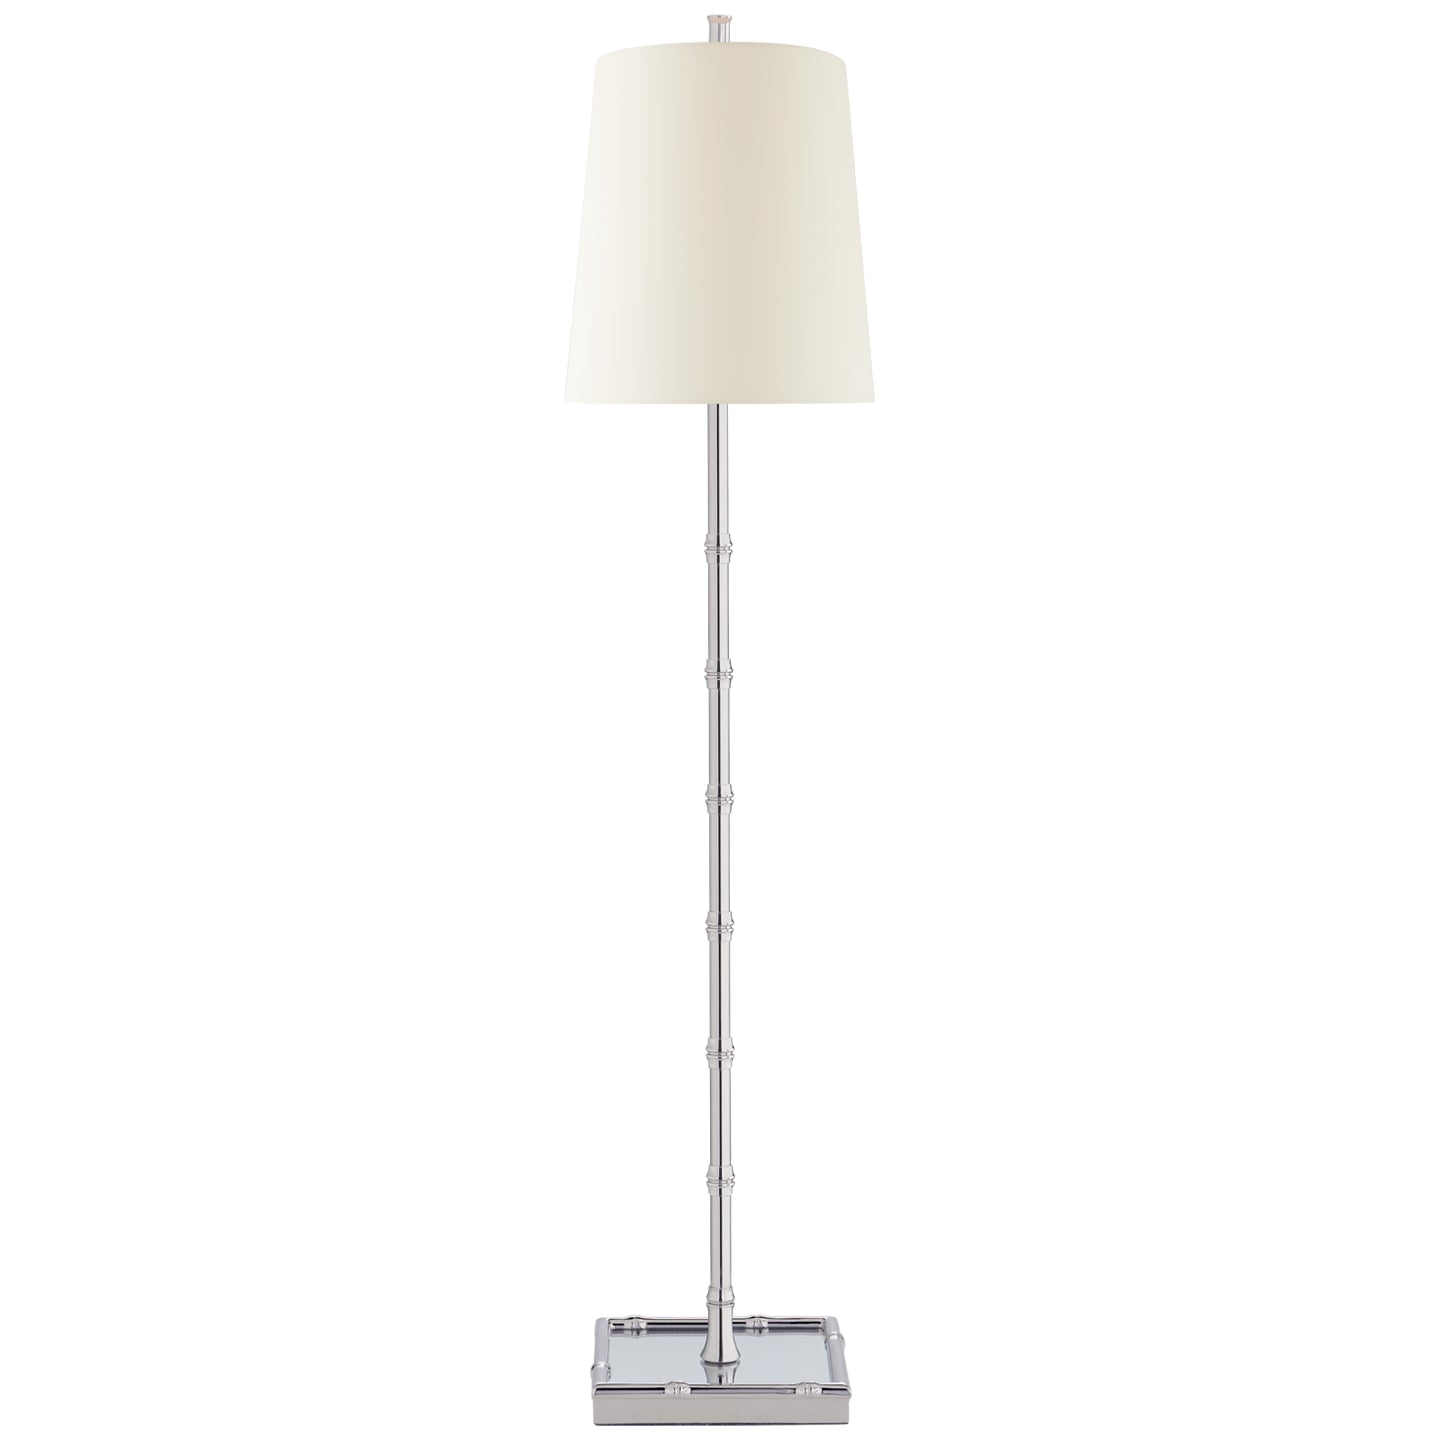 Load image into Gallery viewer, Visual Comfort Signature - S 3177PN-PL - One Light Table Lamp - Grenol - Polished Nickel
